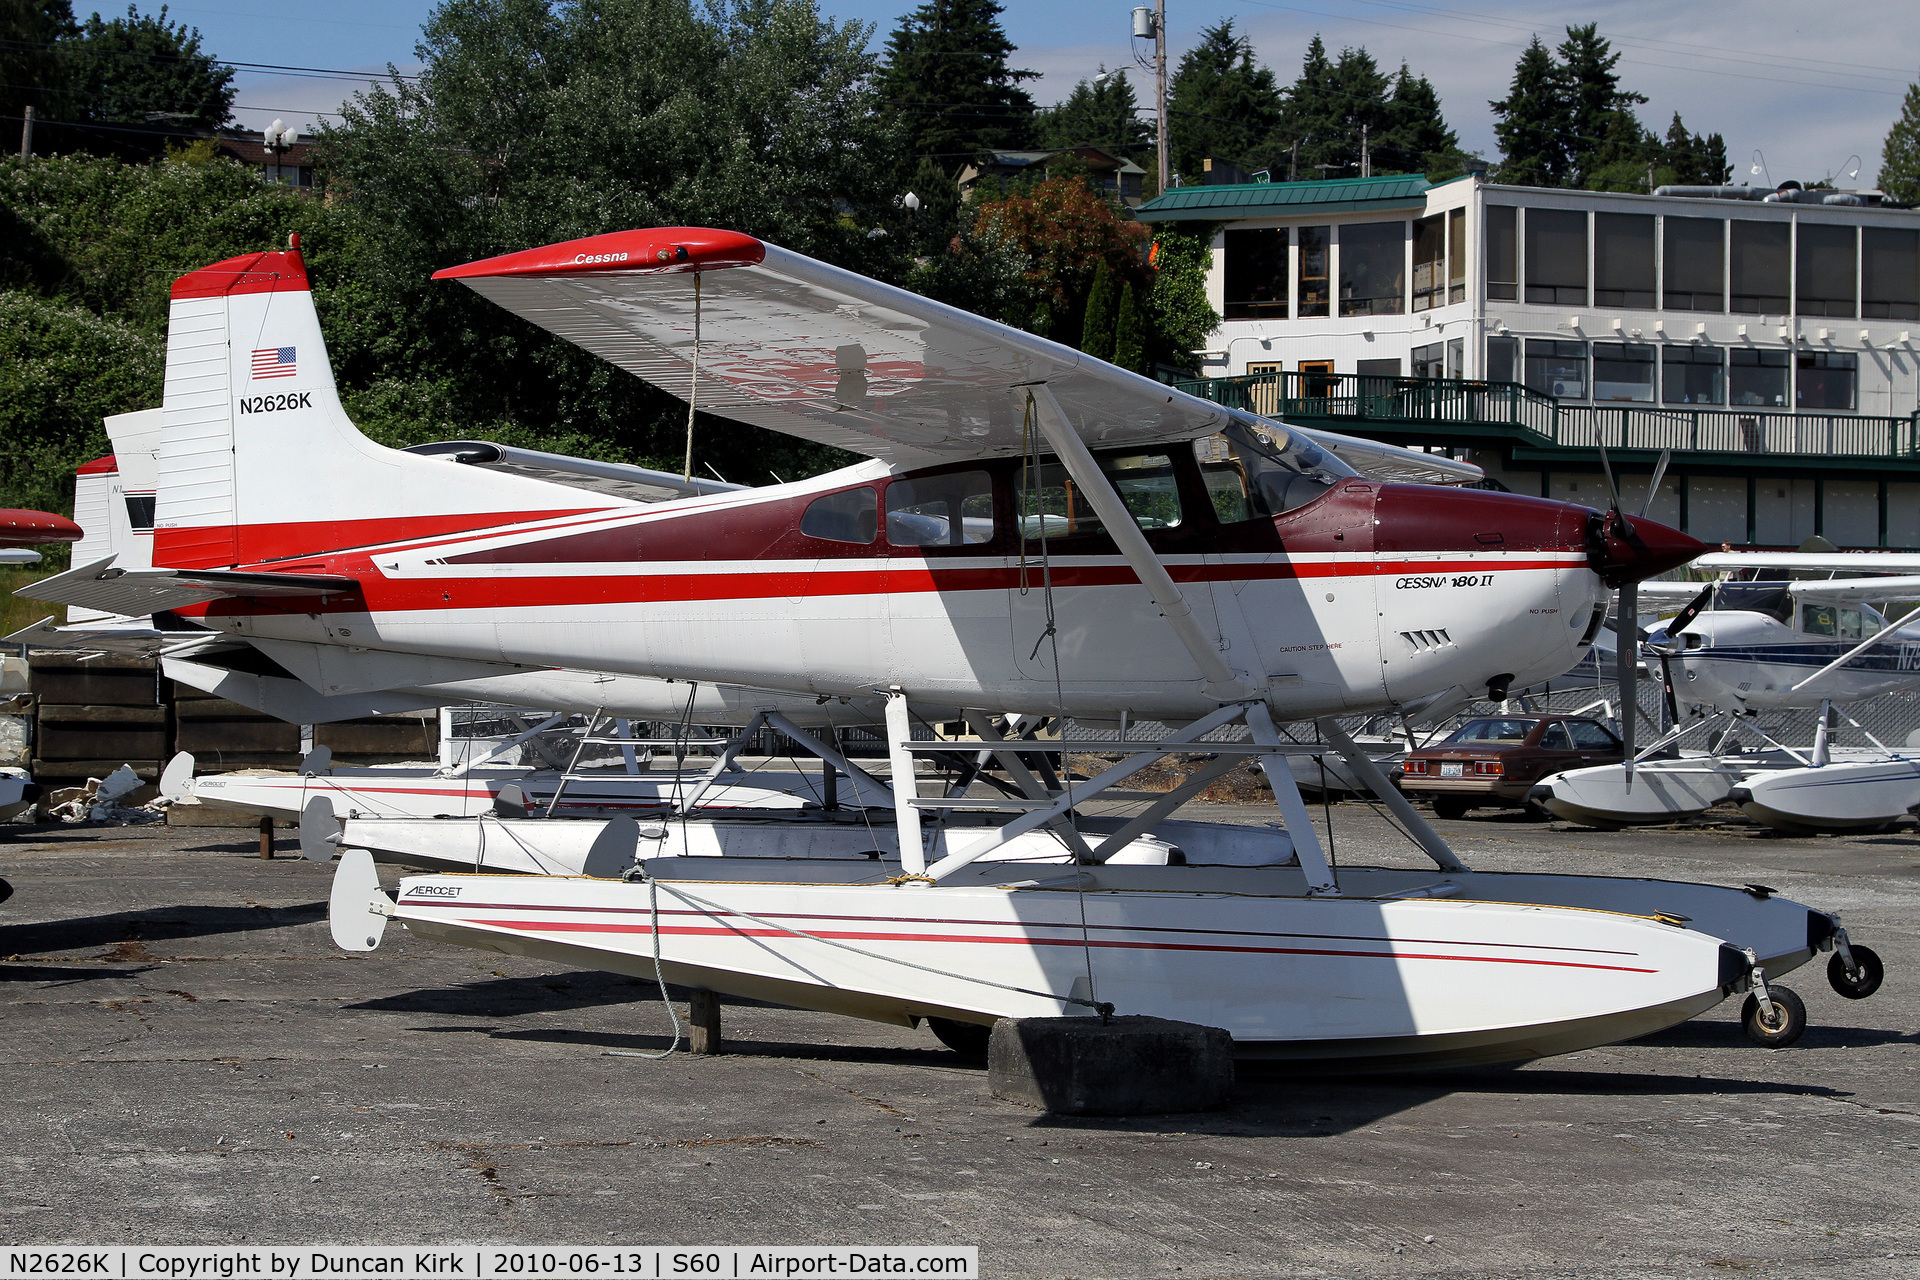 N2626K, 1979 Cessna 180K Skywagon C/N 18053019, Kenmore Air Harbor in the summer is a hive of activity